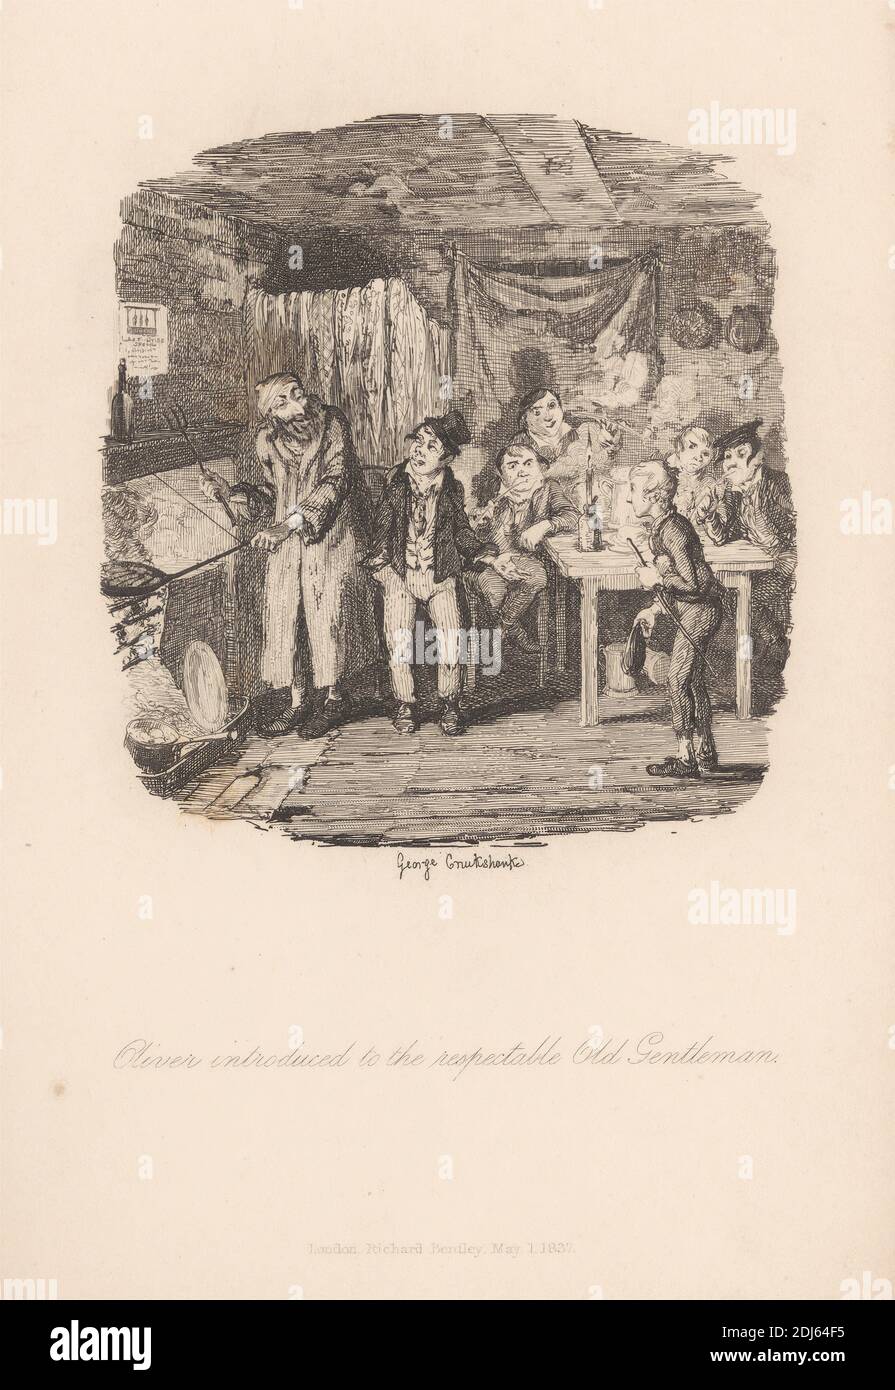 Oliver being Introduced to the Respectable Old Gentleman, Print made by George Cruikshank, 1792–1878, British, 1837, Line engraving on medium, slightly textured, cream wove paper Stock Photo